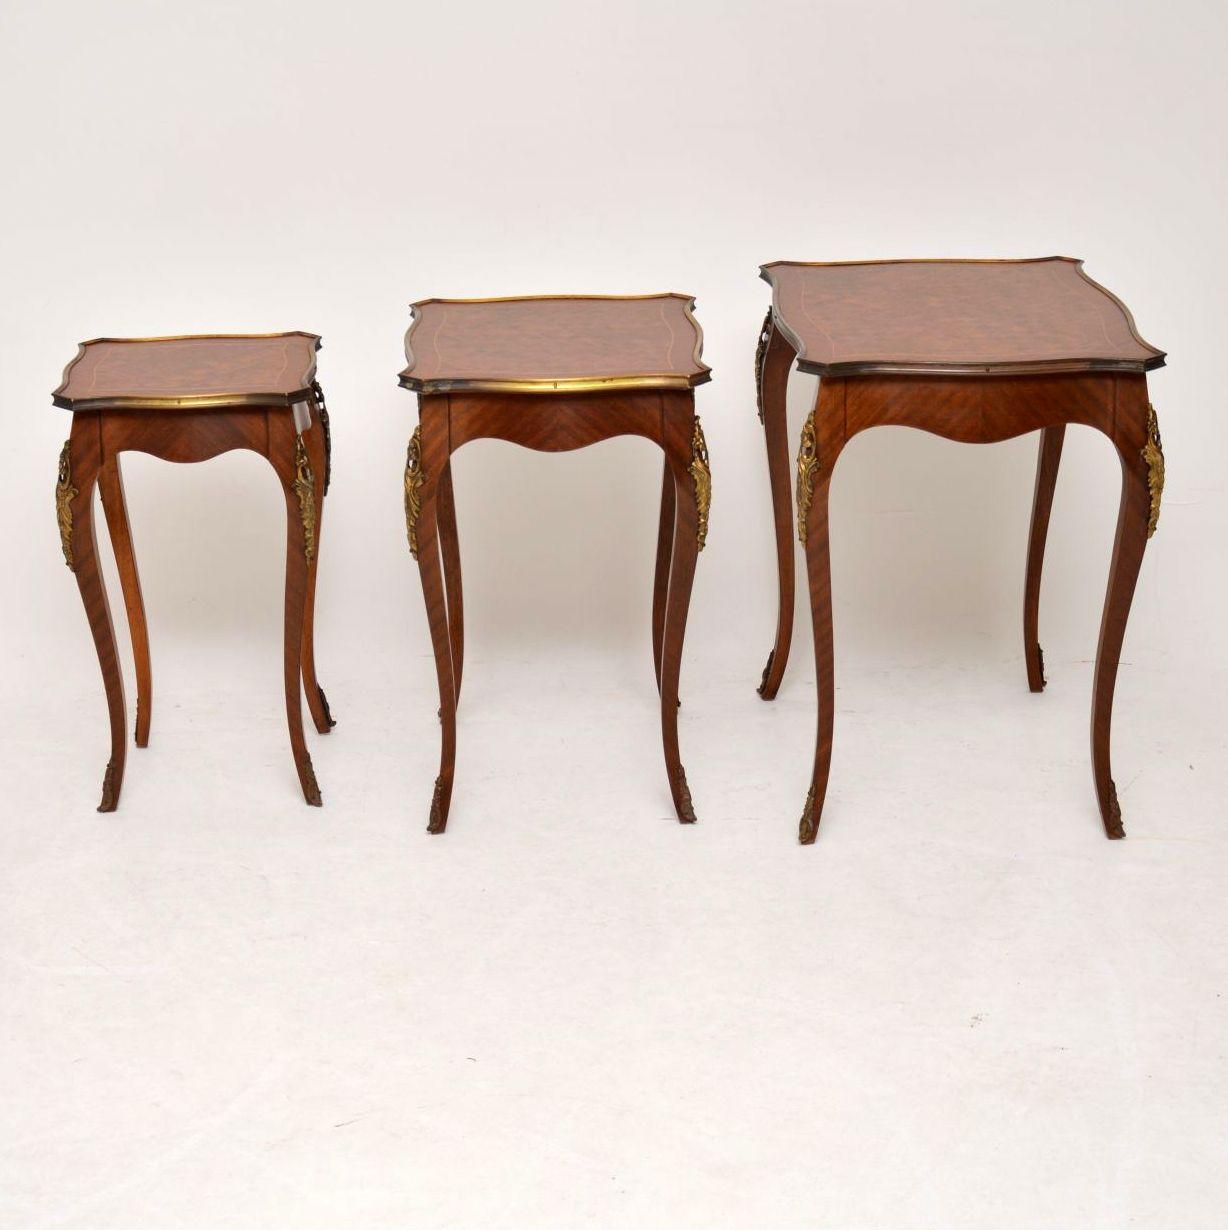 Early 20th Century Antique French Inlaid Parquetry Nest of Tables